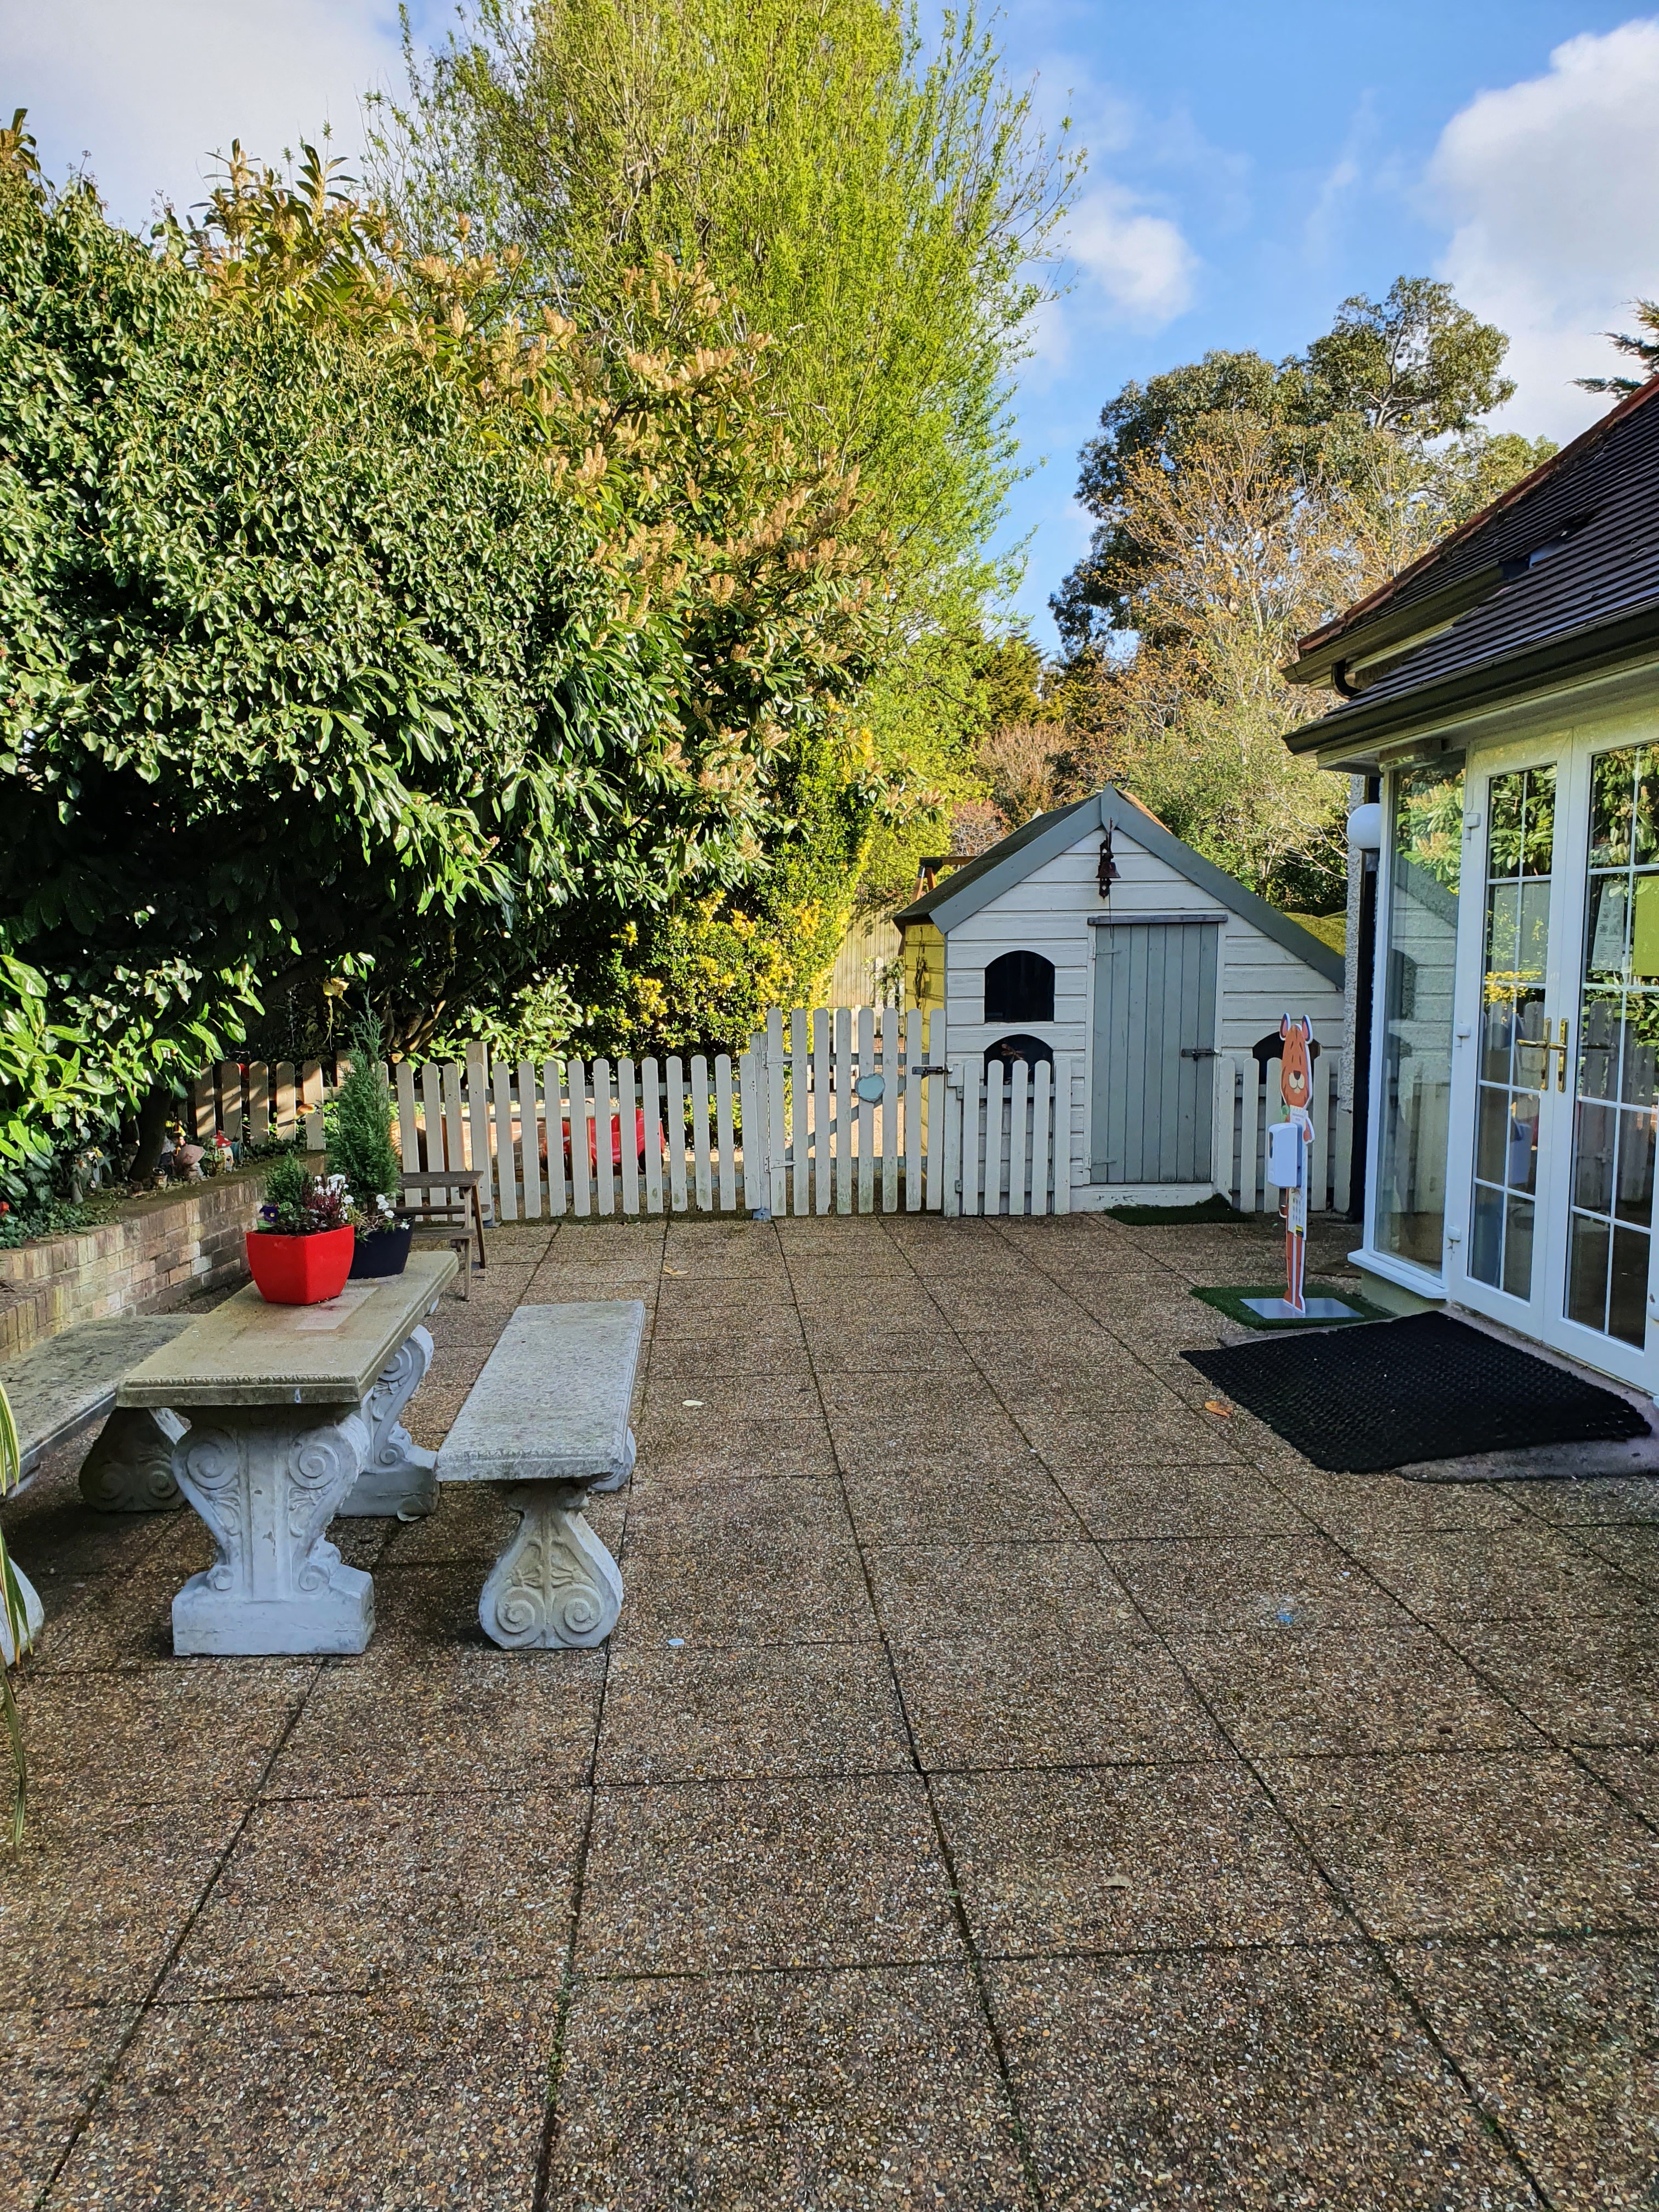 Paved Garden and Playhouse.jpg